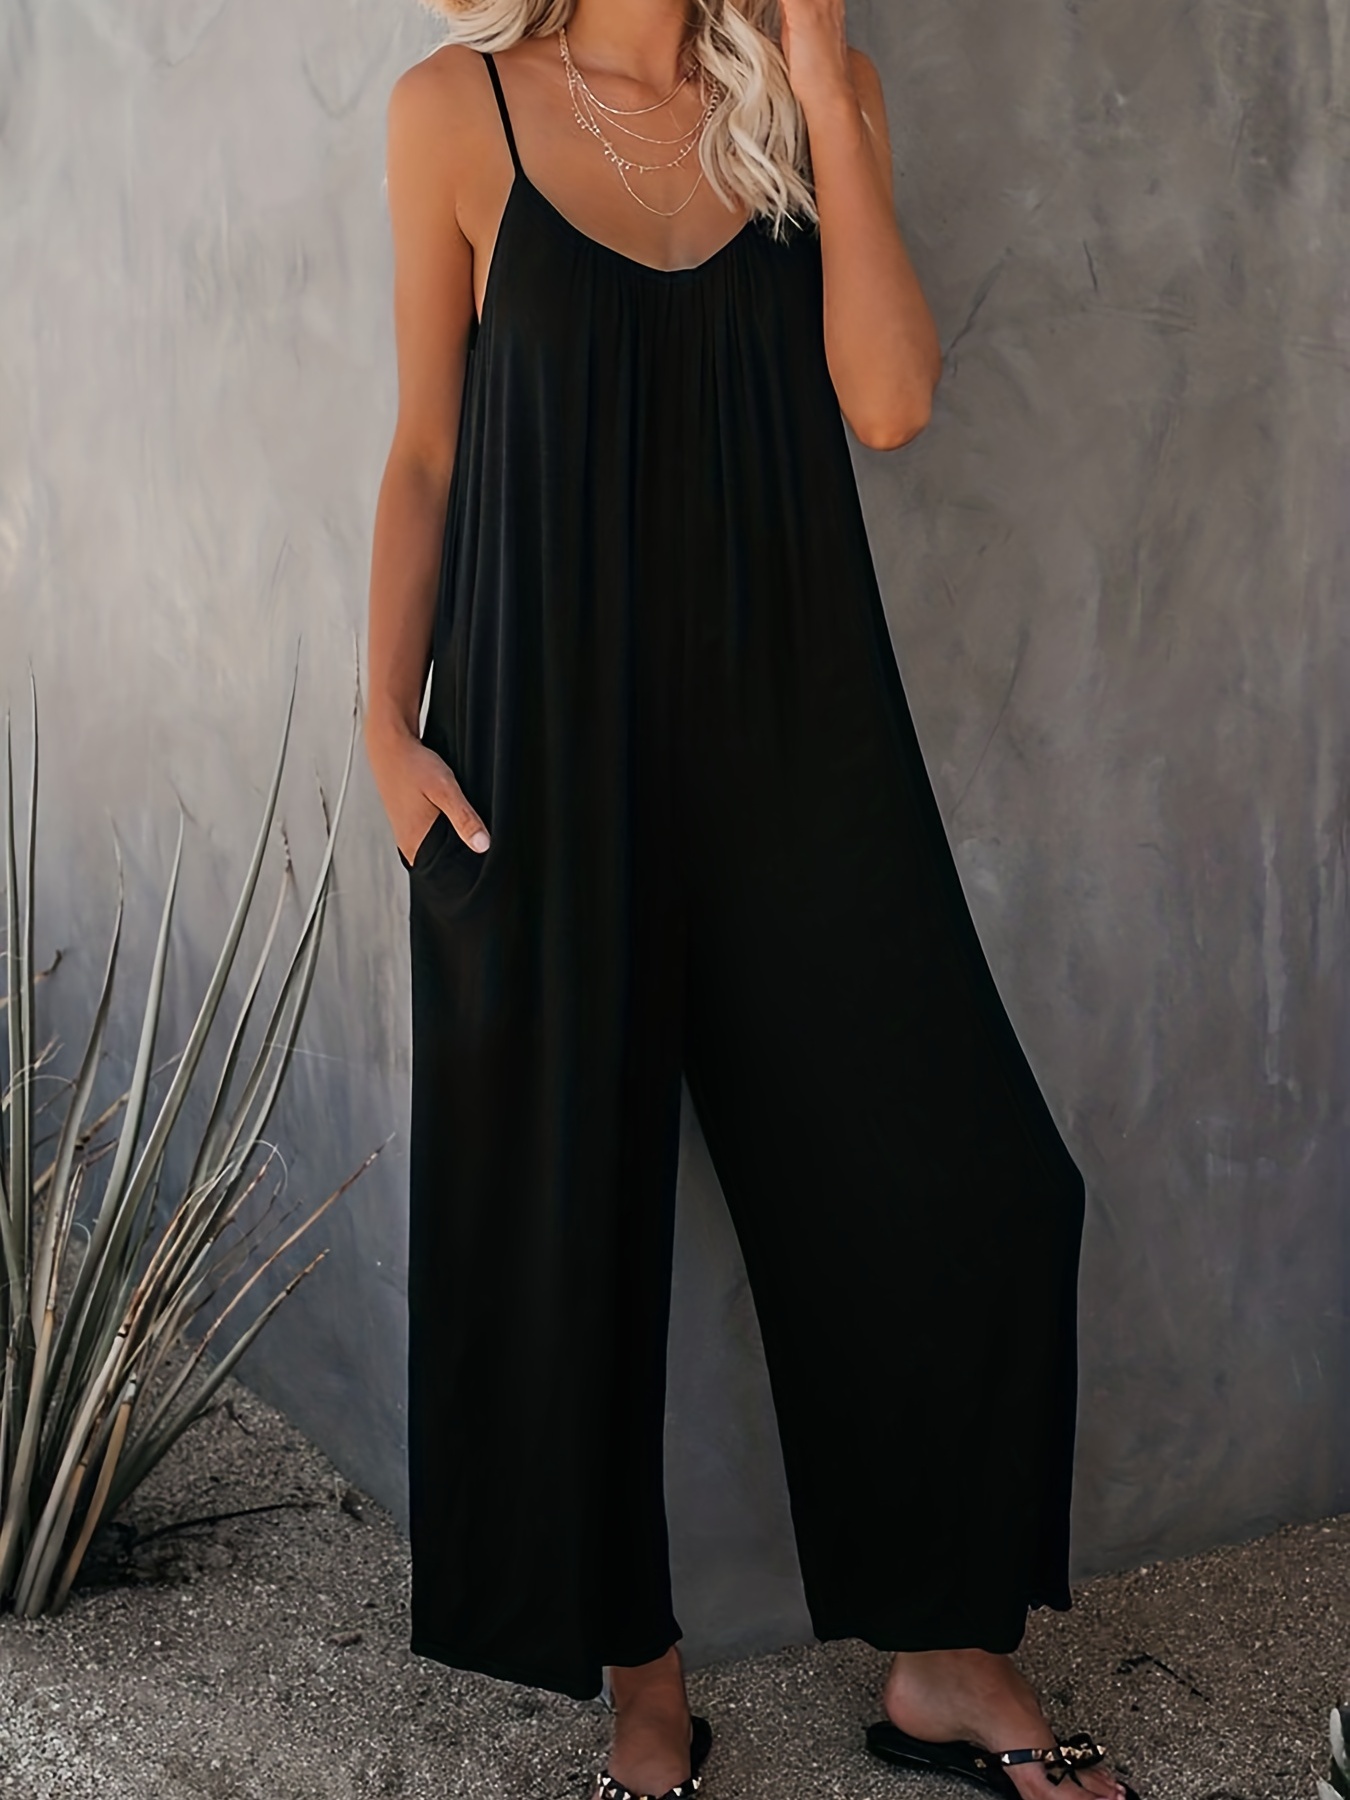 Plus Size Women Strappy Loose Dungarees Jumpsuit Oversized Romper Baggy  Overalls | eBay